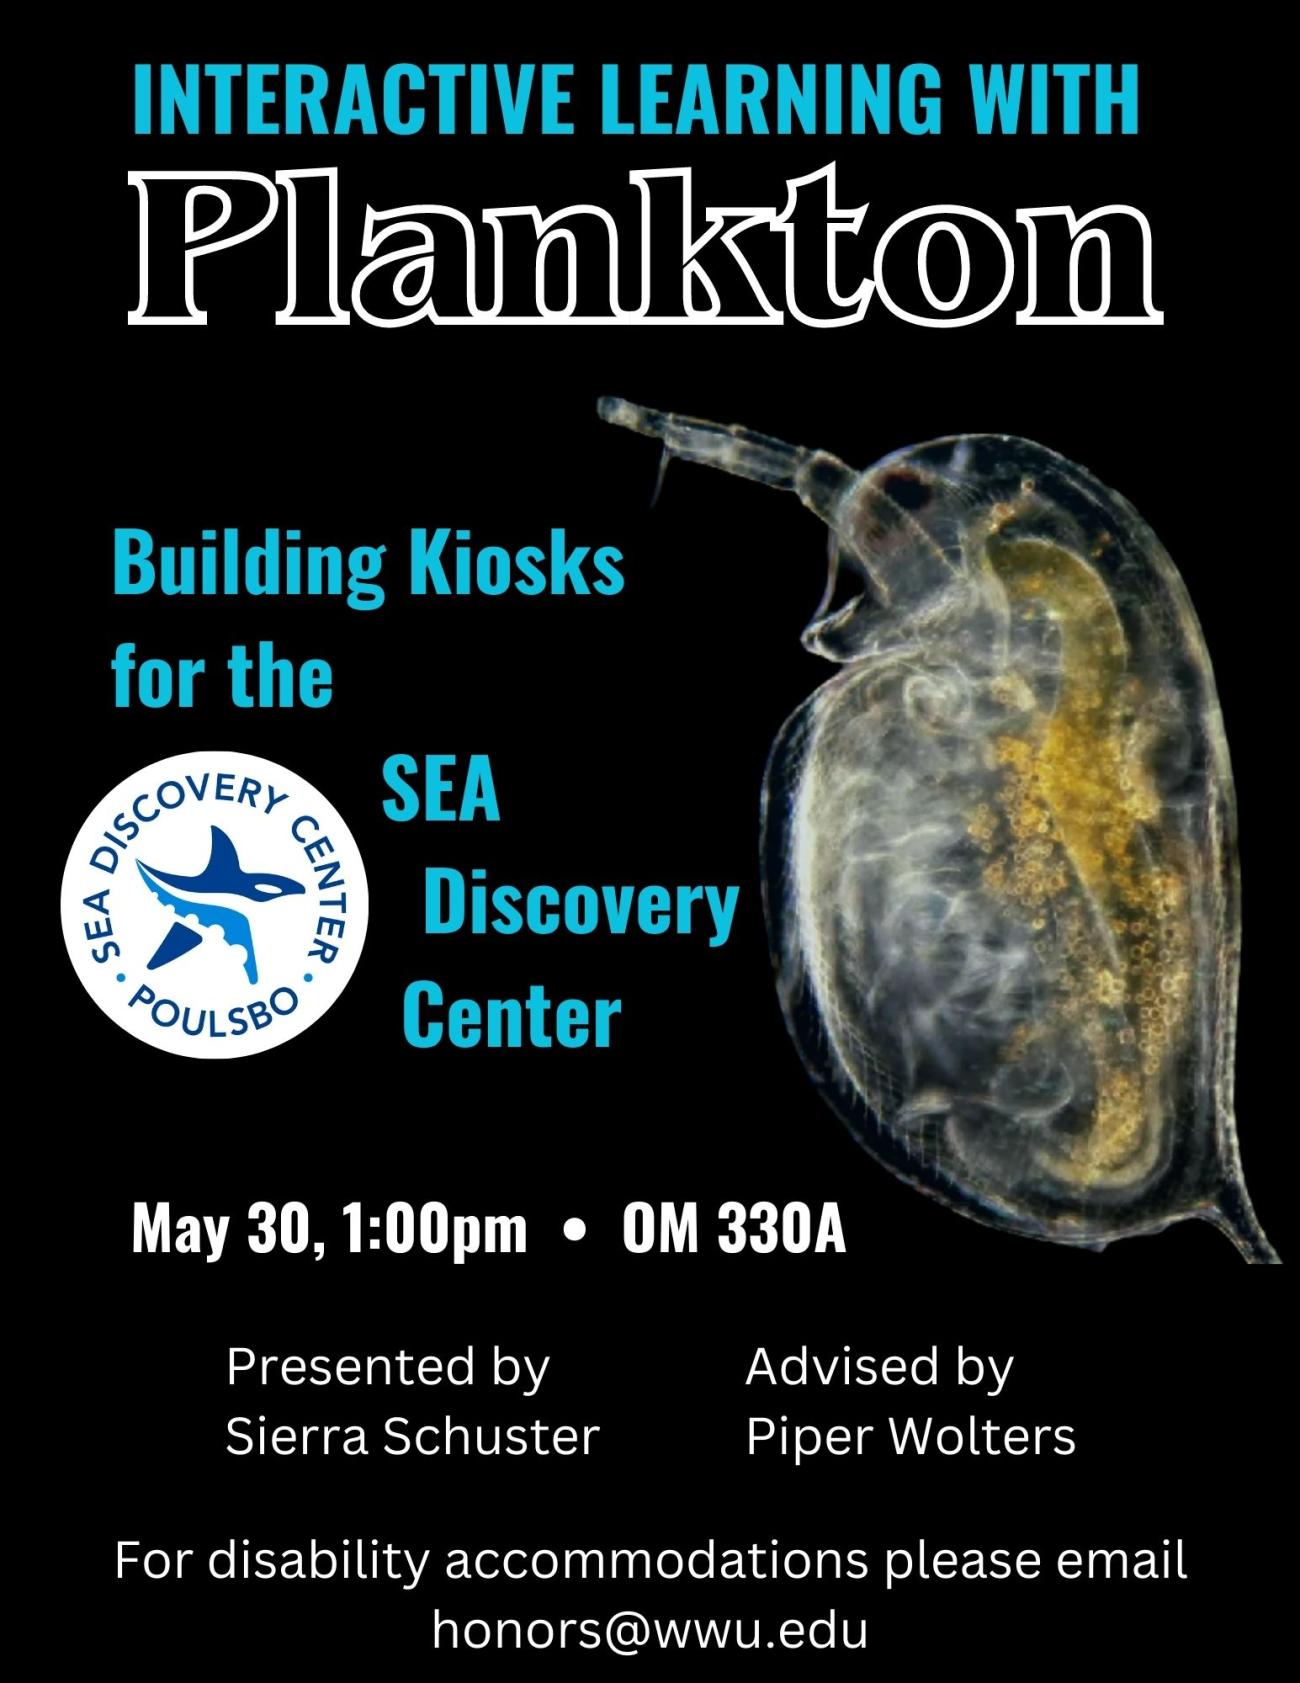 A poster with a black background with an image of a water flea on the right and a logo of the SEA Discovery Center-a white circle with a blue stylized starfish surrounded by the Center's name on the top and "Paulsbo" at the bottom. Text reads: "Interactive Learning with Plankton. Building Kiosks for the SEA Discovery Center. May 30, 2:00pm, OM 330A. Presented by Sierra Schuster. Advised by Piper Wolters. For disability accommodations please email honors@wwu.edu.”